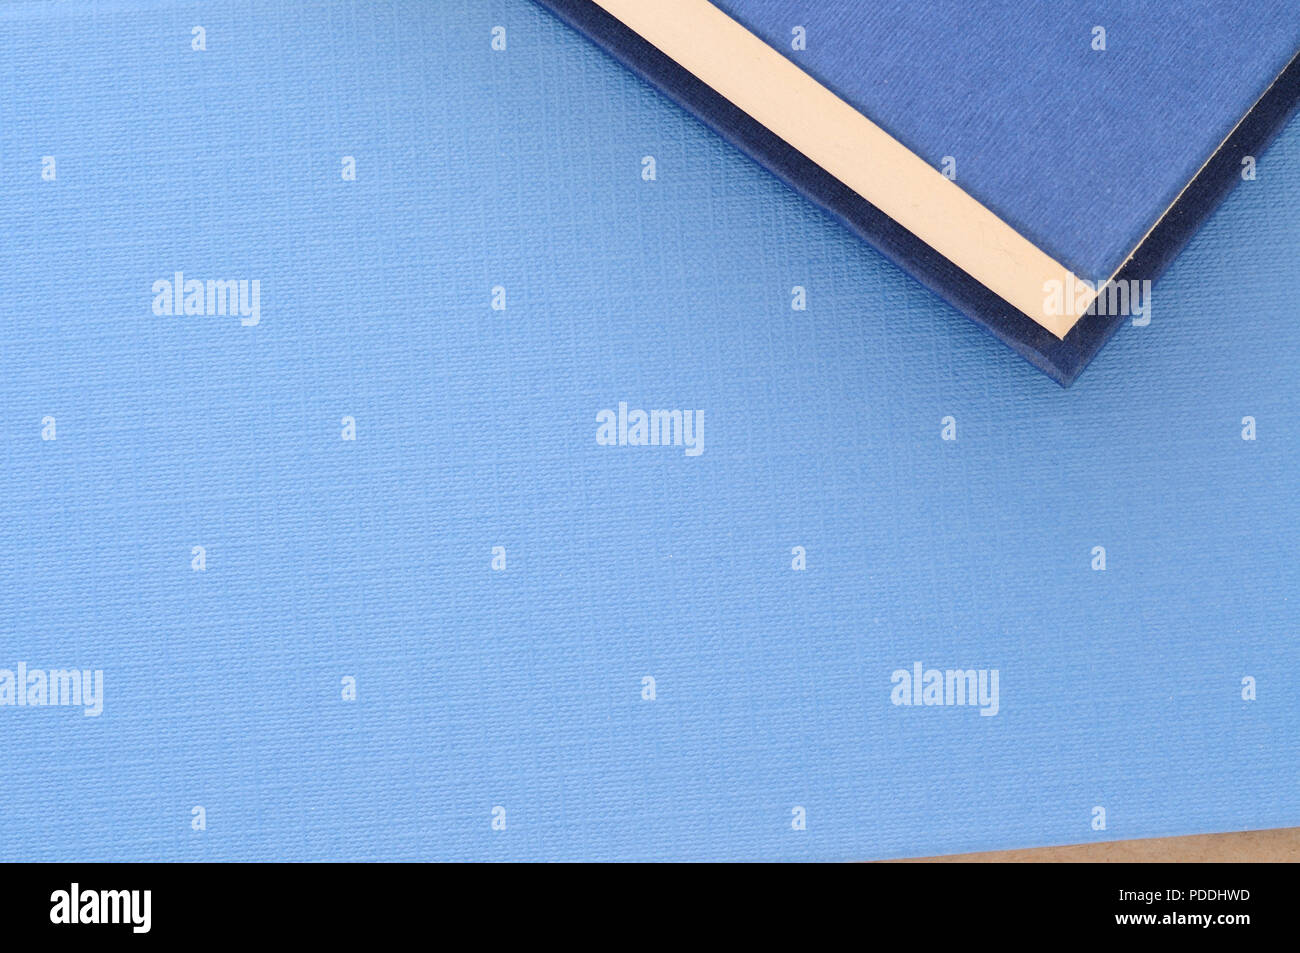 blue book covers, close up, abstract background Stock Photo